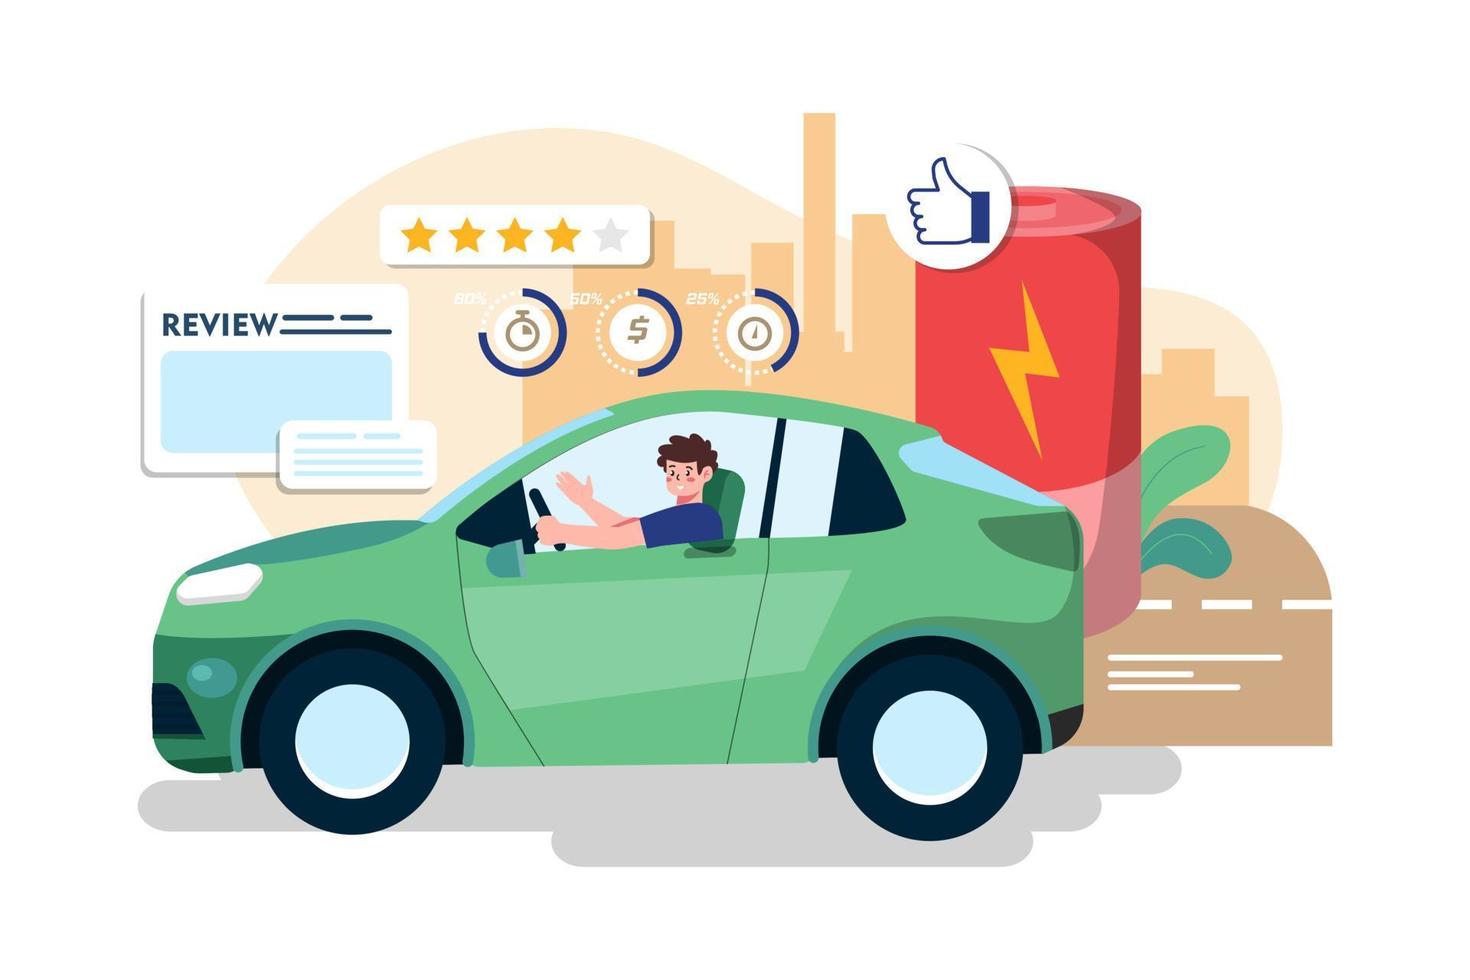 Man Riding Electronic Vehicle And Giving A Review vector